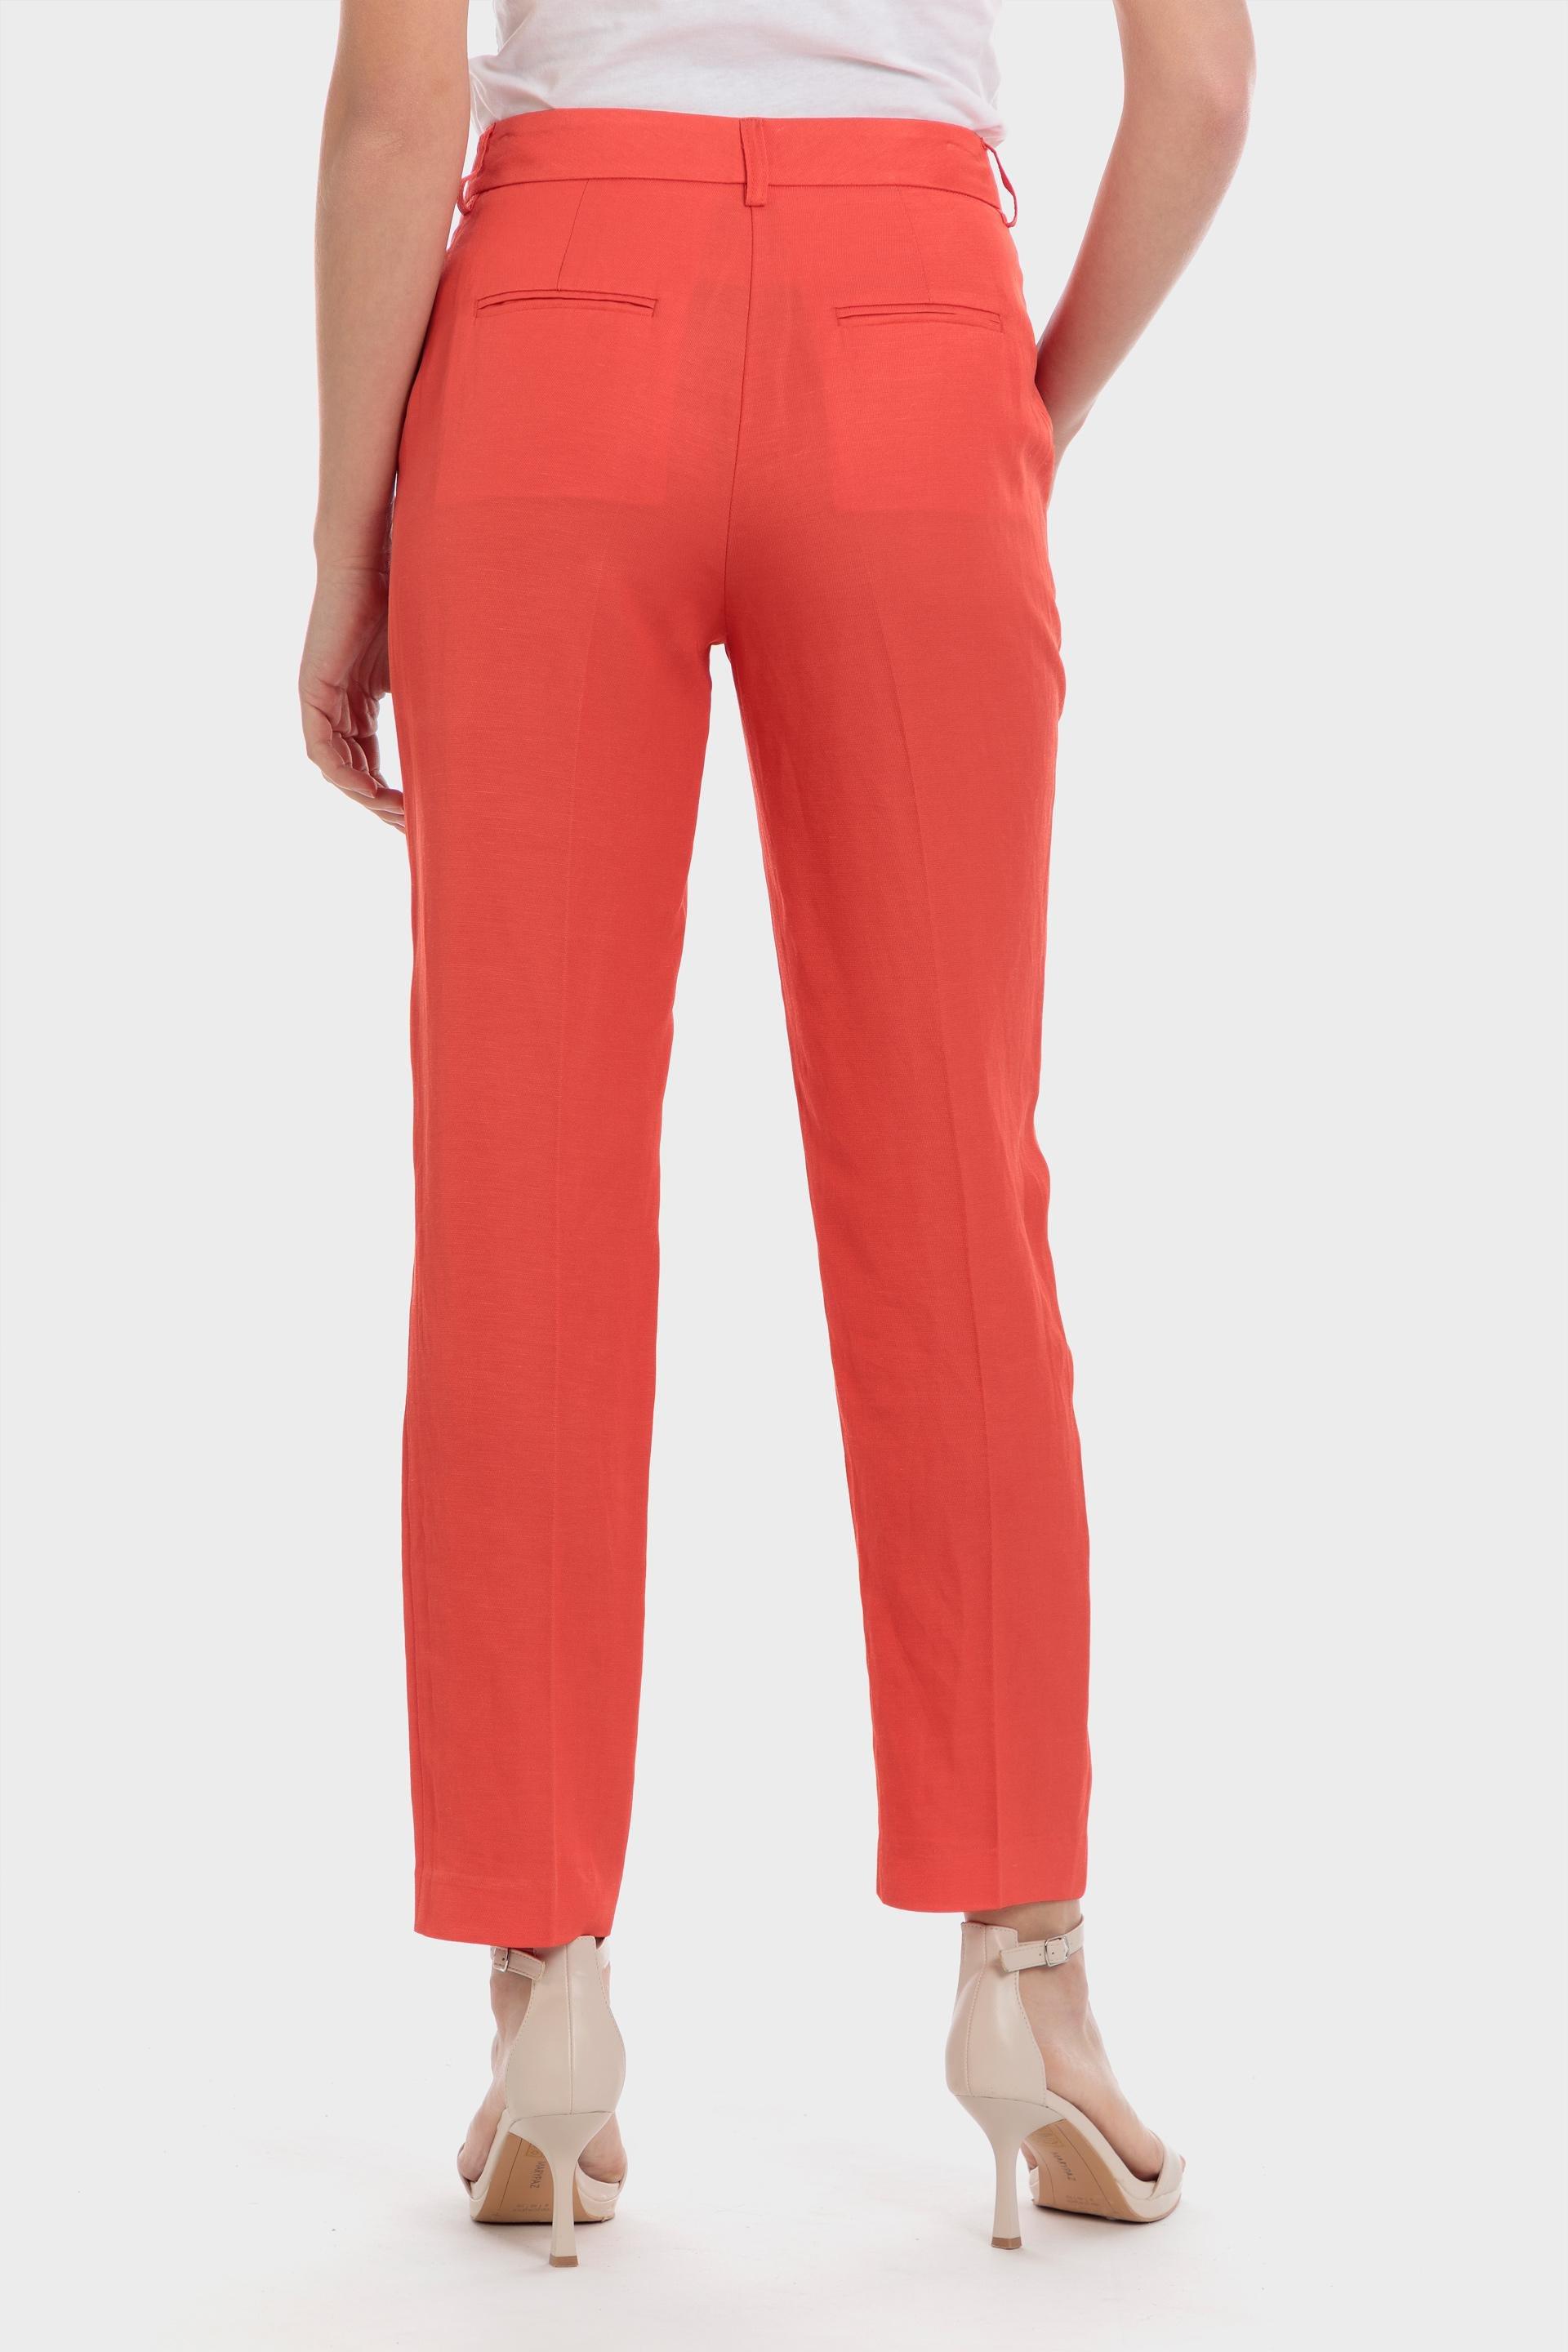 Punt Roma - Red Chino Trousers